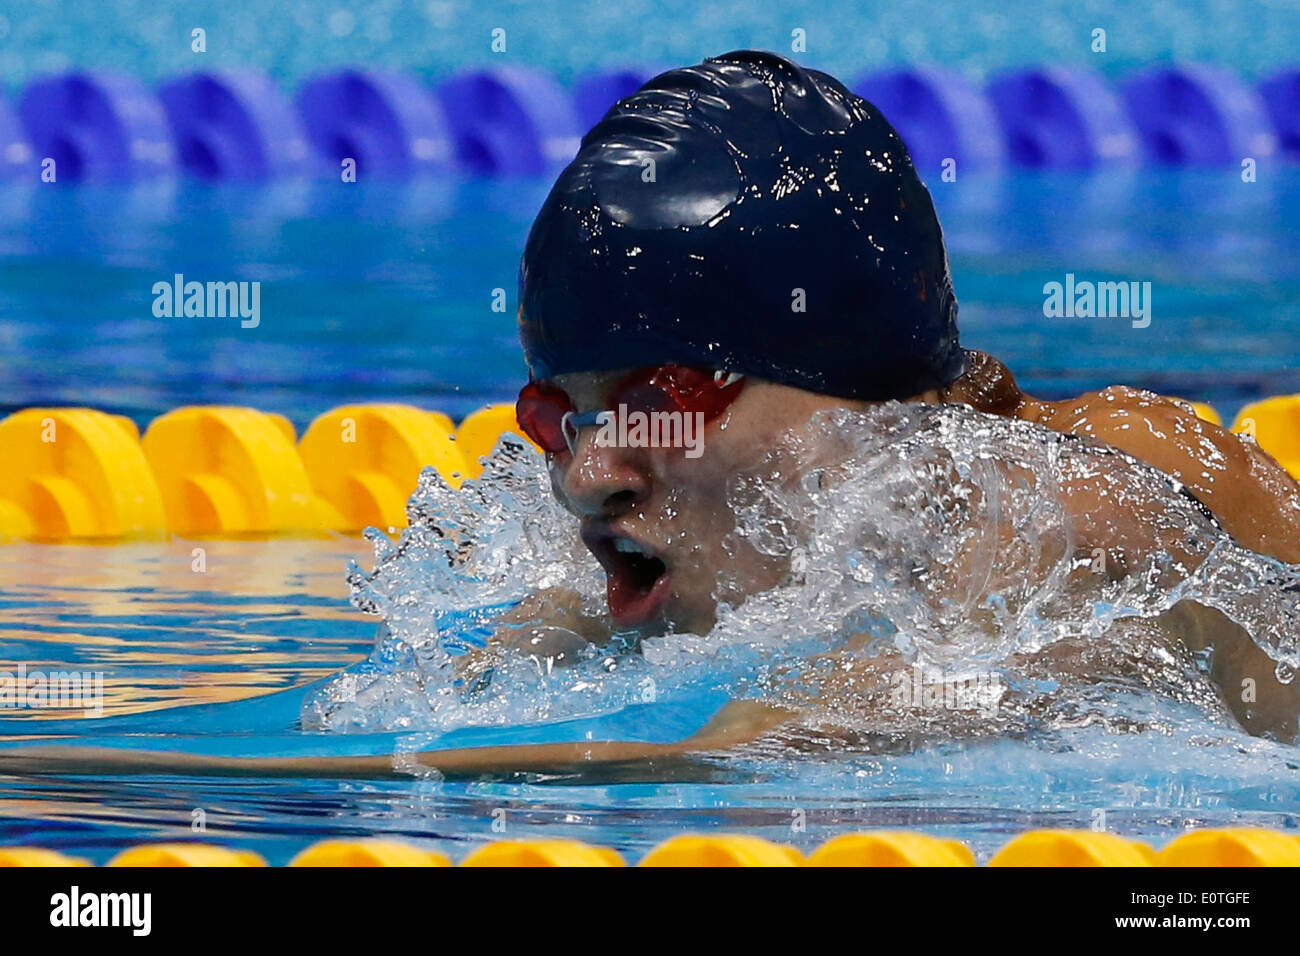 Yevheniy Bohodayko of Ukraine on his way to win the gold during the men's 100m Backstroke - SB6 final swimming session competition held at the Aquatics Center during the London 2012 Paralympic Games in London, Britain, 05 September 2012. Stock Photo